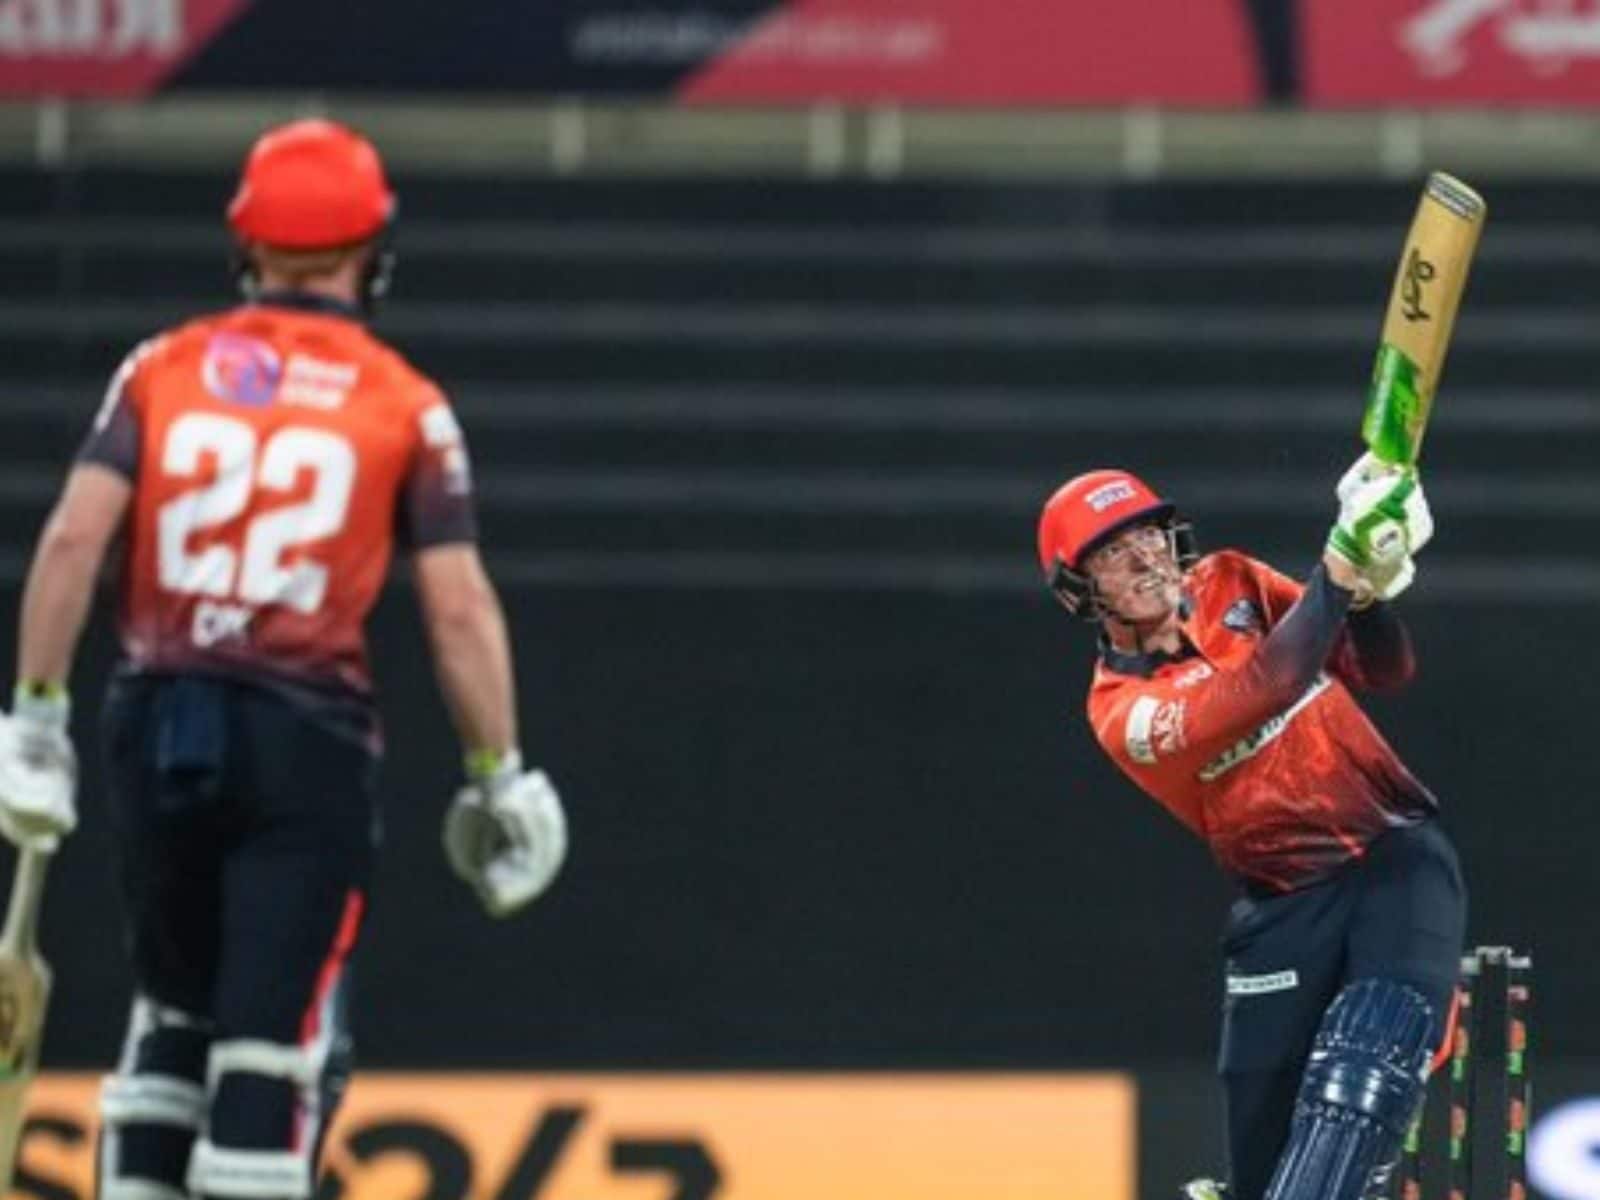 Abu Dhabi T10 League 2022 Morrisville Samp Army vs Delhi Bulls Live Streaming When and Where to Watch Match Live Coverage on TV and Online